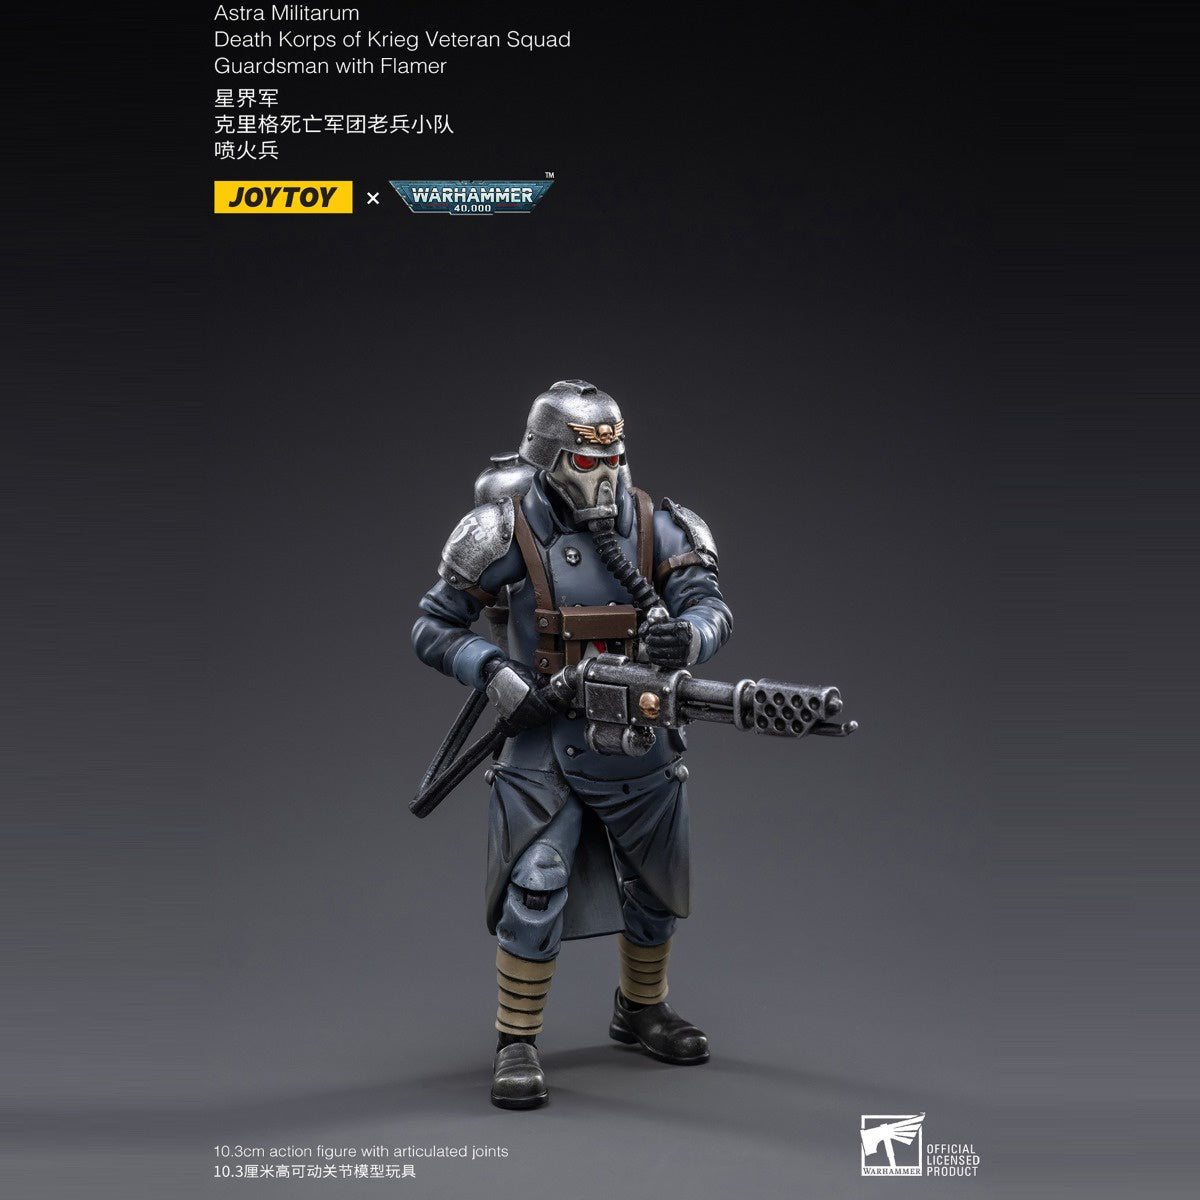 Warhammer Collectibles: 1/18 Scale Death Korps of Krieg Veteran Squad Guardsman with Flamer